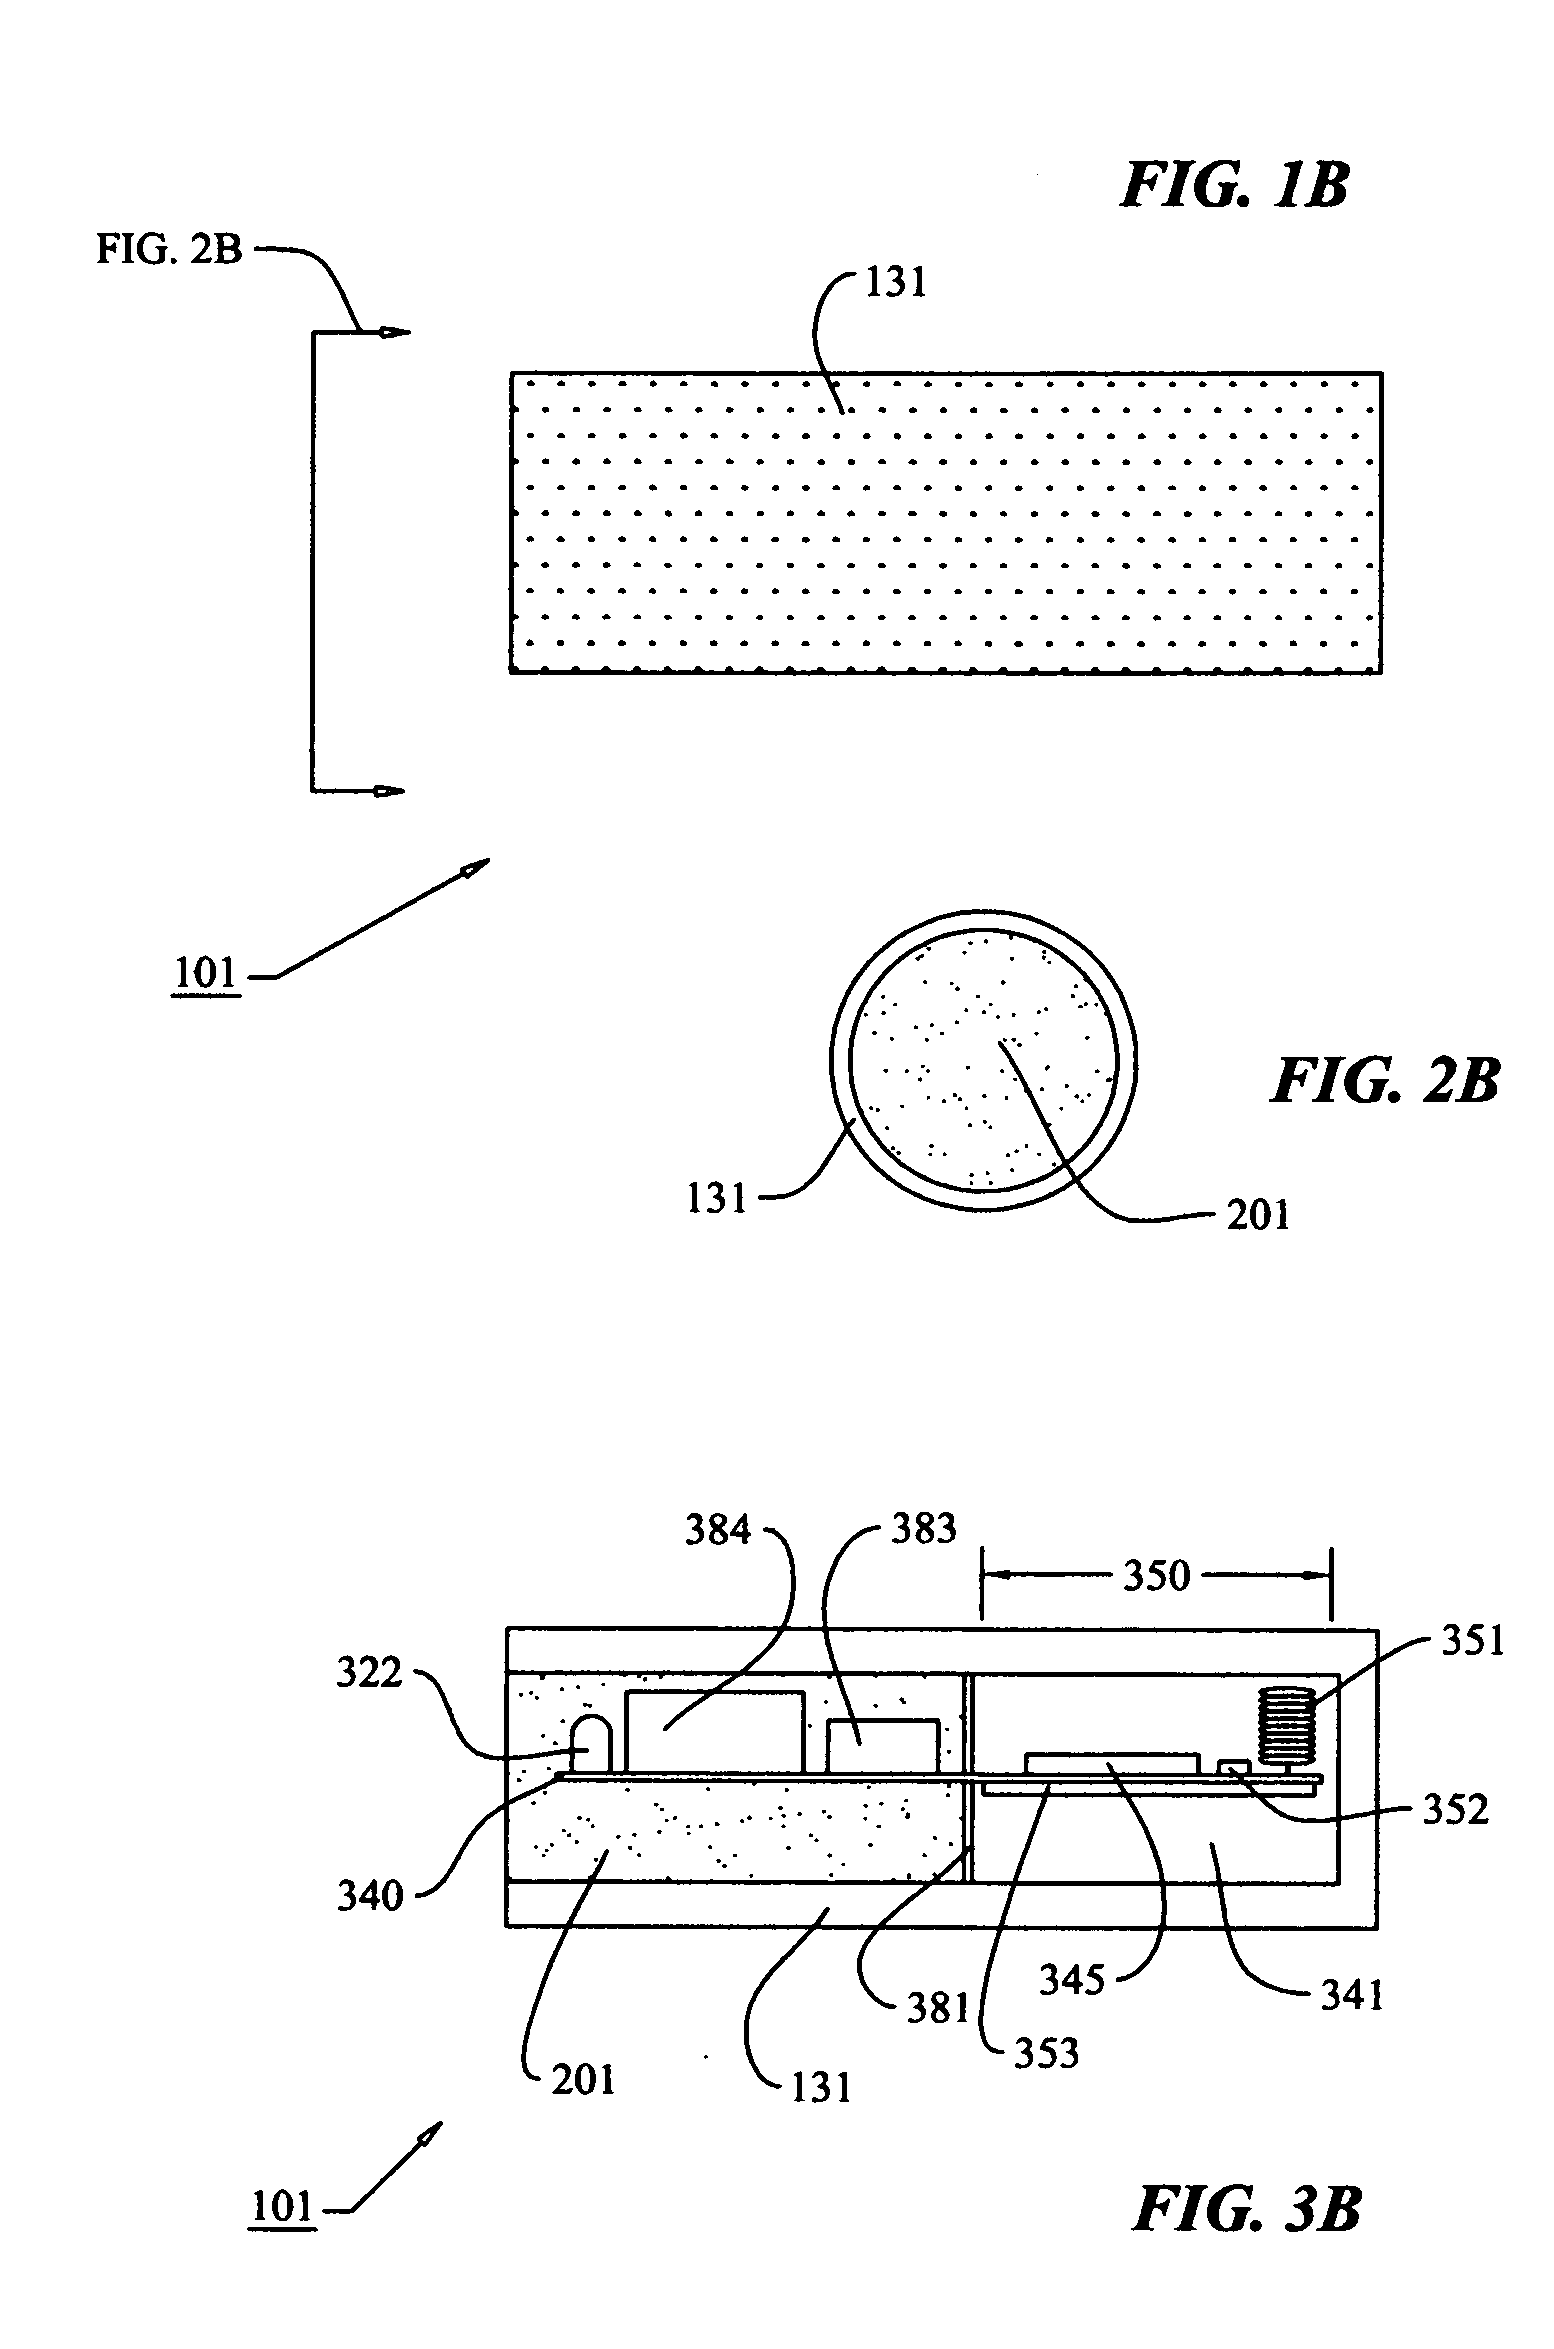 Wireless communication device with internal antenna system for use in hazardous locations